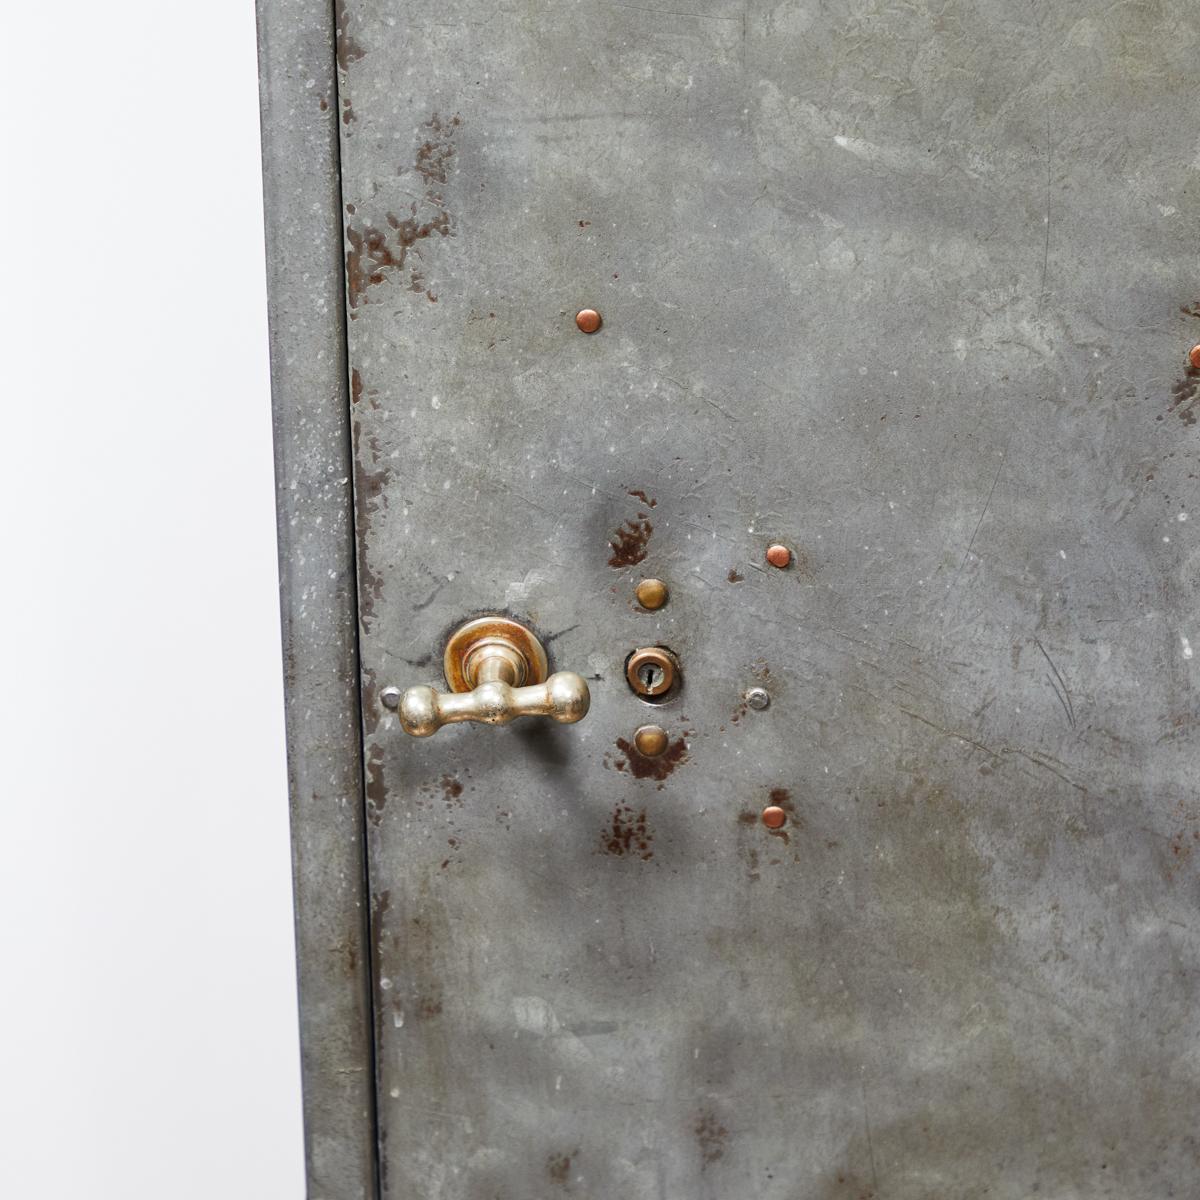 1920s English industrial metal storage cabinet. With a slightly arc-shaped top,  ribbed metal door handle and streaked, mottled texture, the piece has a cool and industrial feel. A fabulous way to incorporate a grittier element with a rich metallic